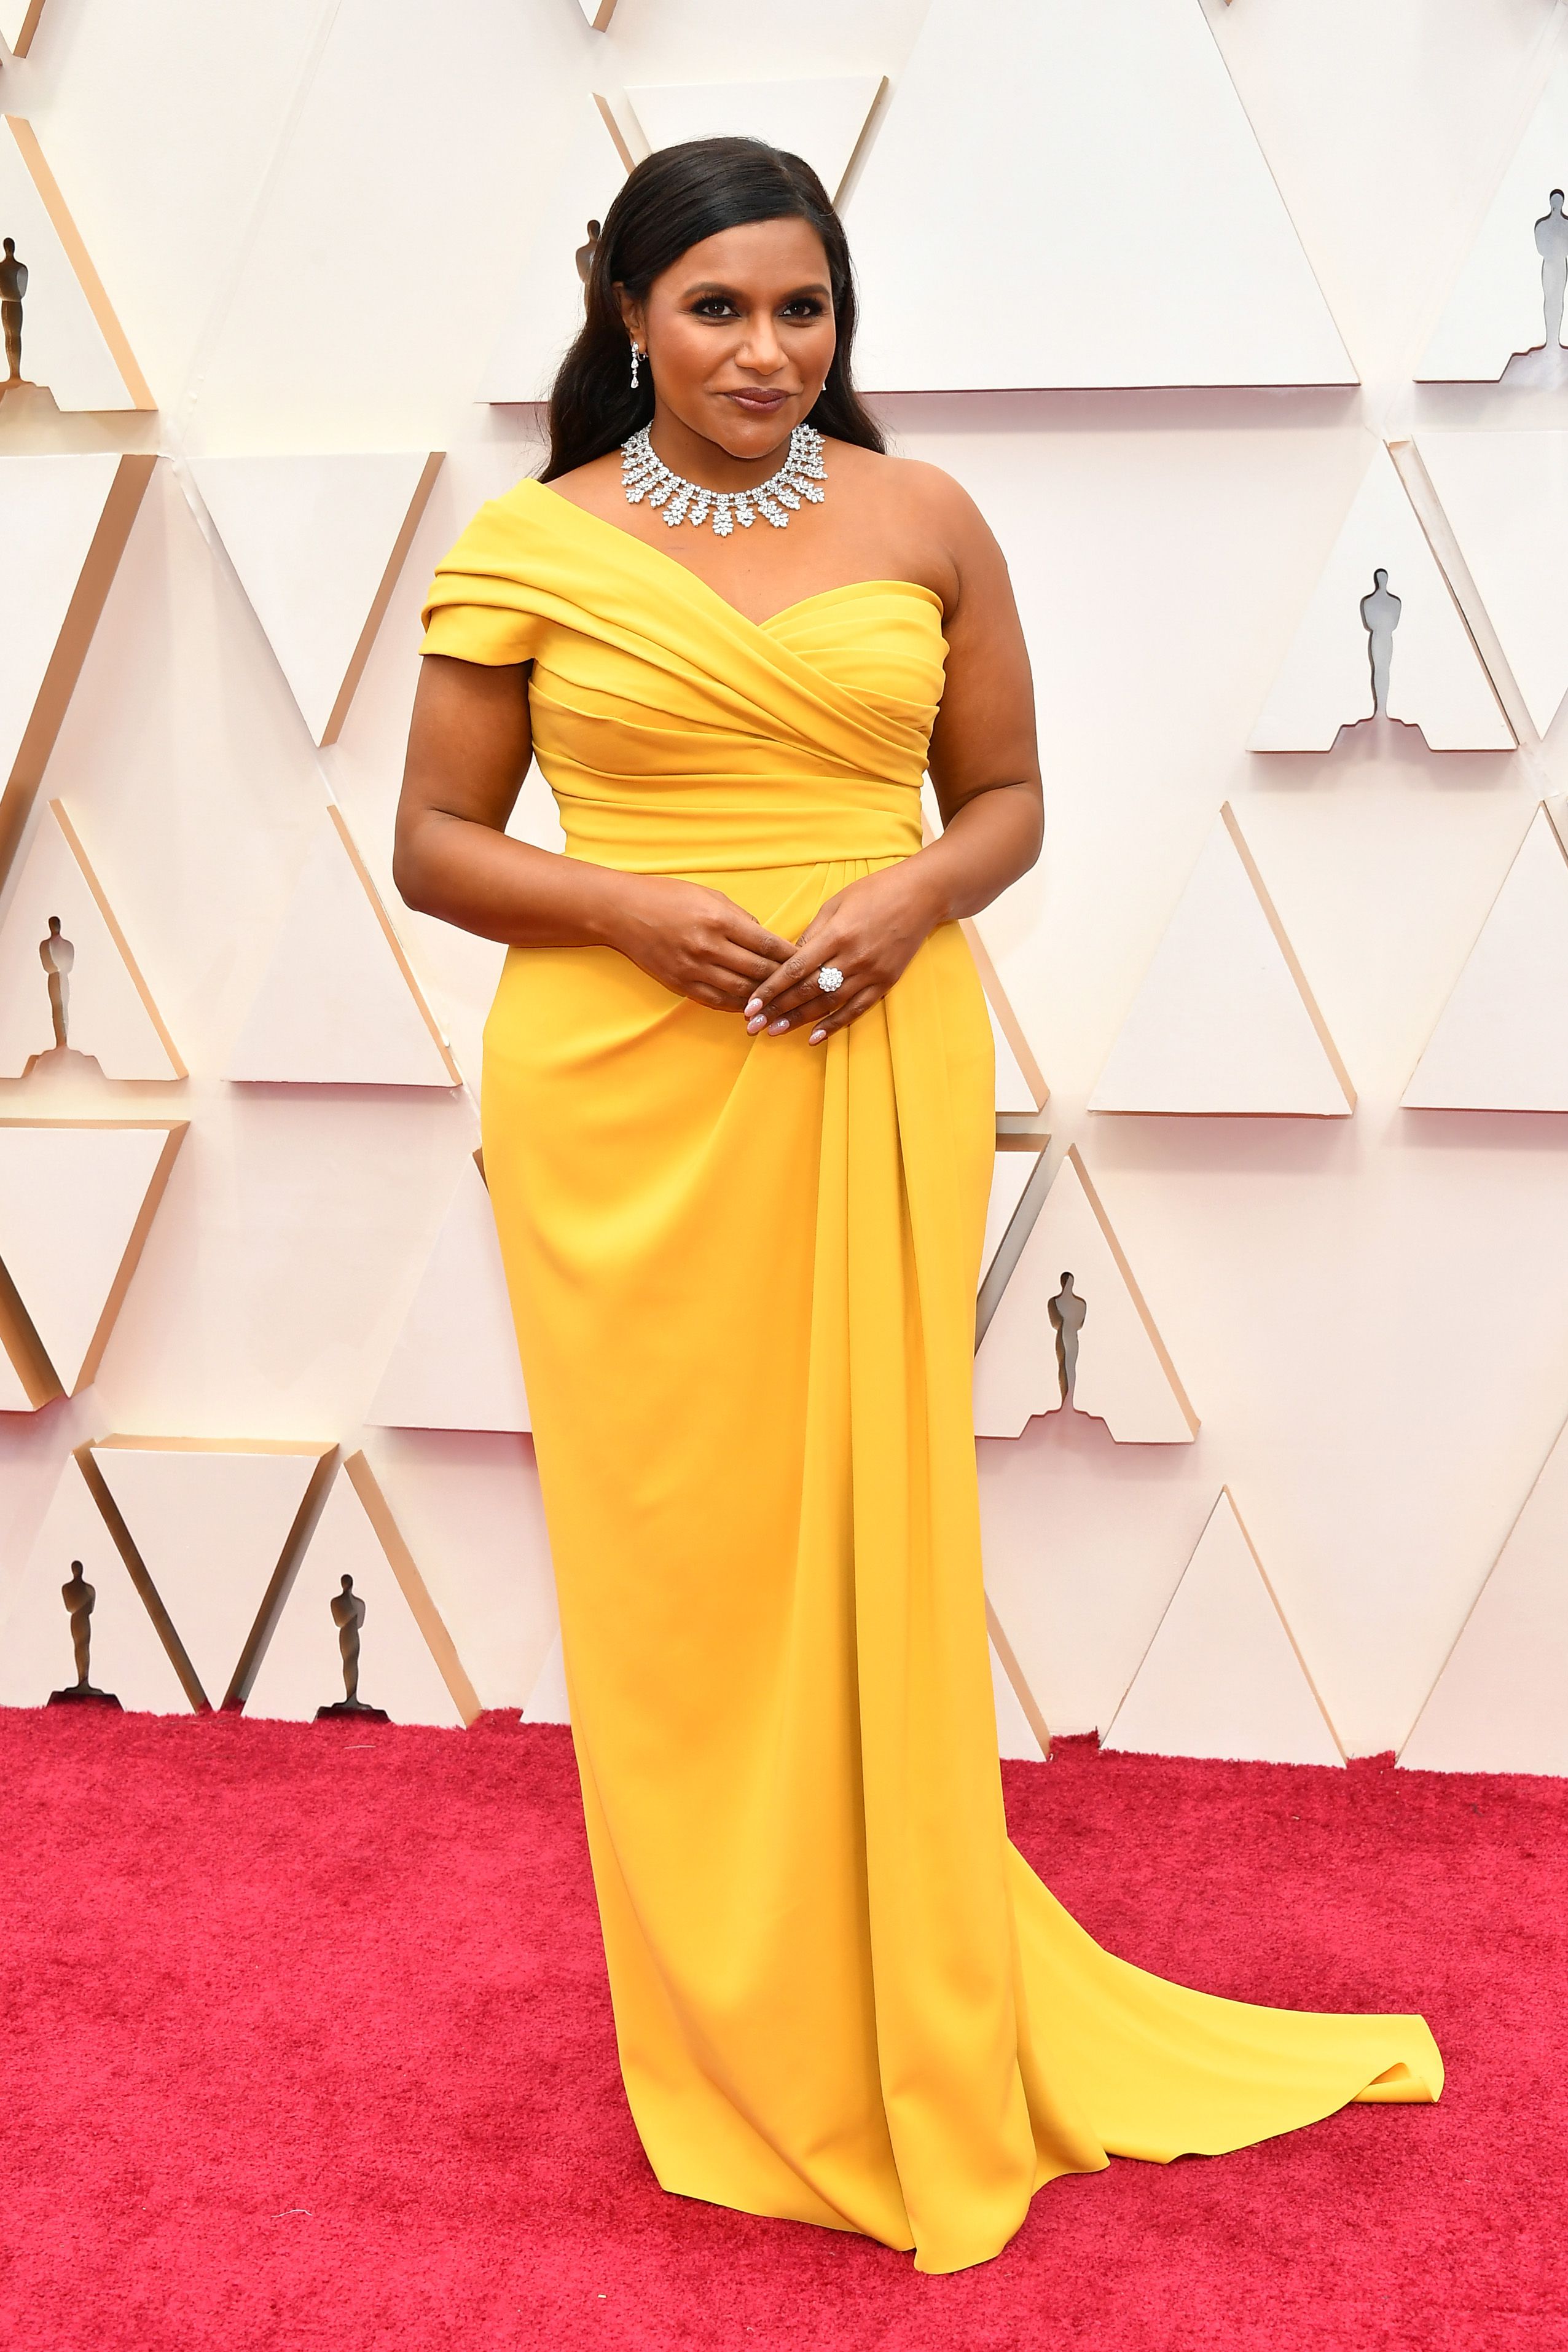 Regina King Shines In a Light Pink Gown at Oscars 2020: Photo 4433473, 2020 Oscars, Oscars, Regina King Photos